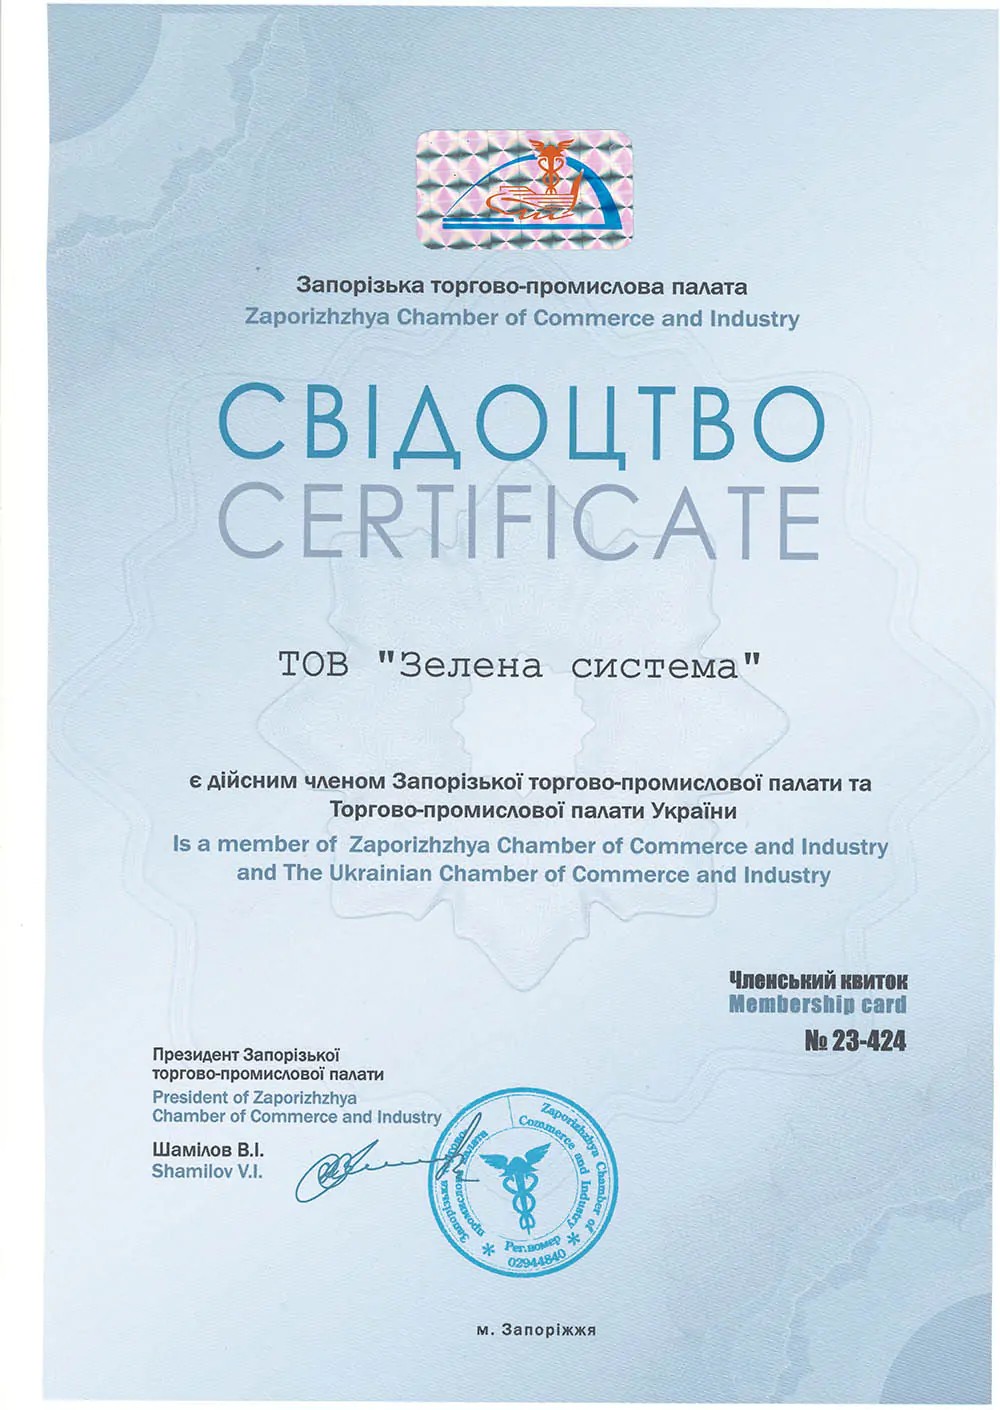 GREEN SYSTEM certificates